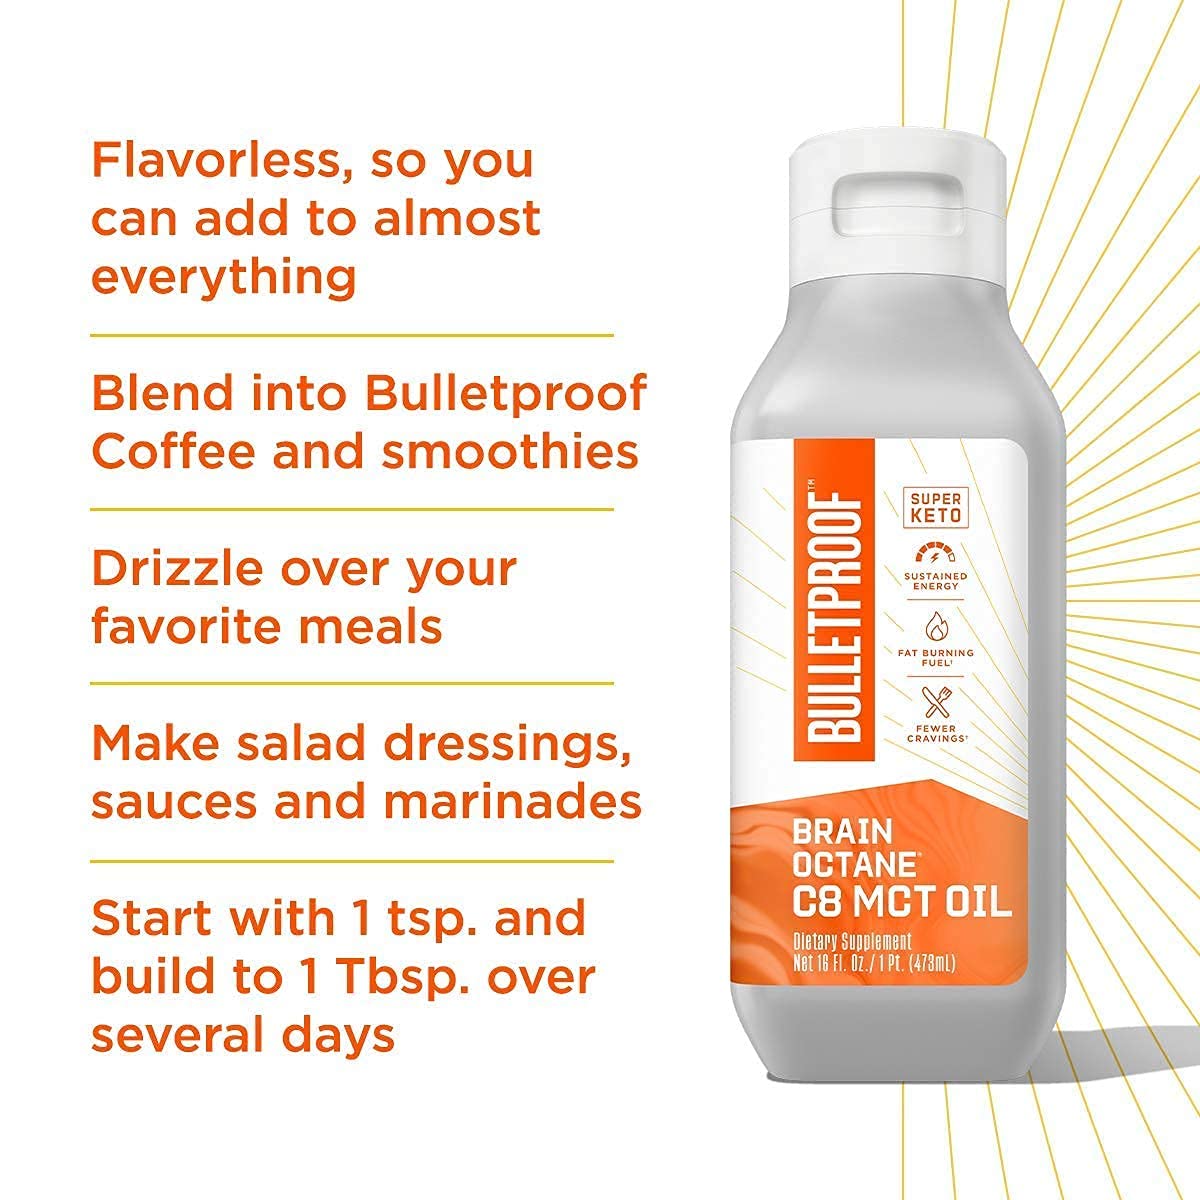 Bulletproof Brain Octane Premium C8 MCT Oil from Non-GMO Coconuts Plus Grass-fed Ghee Bundle, Keto Supplement for Sustained Energy, Appetite Control and Energy, Great for Coffee and Cooking